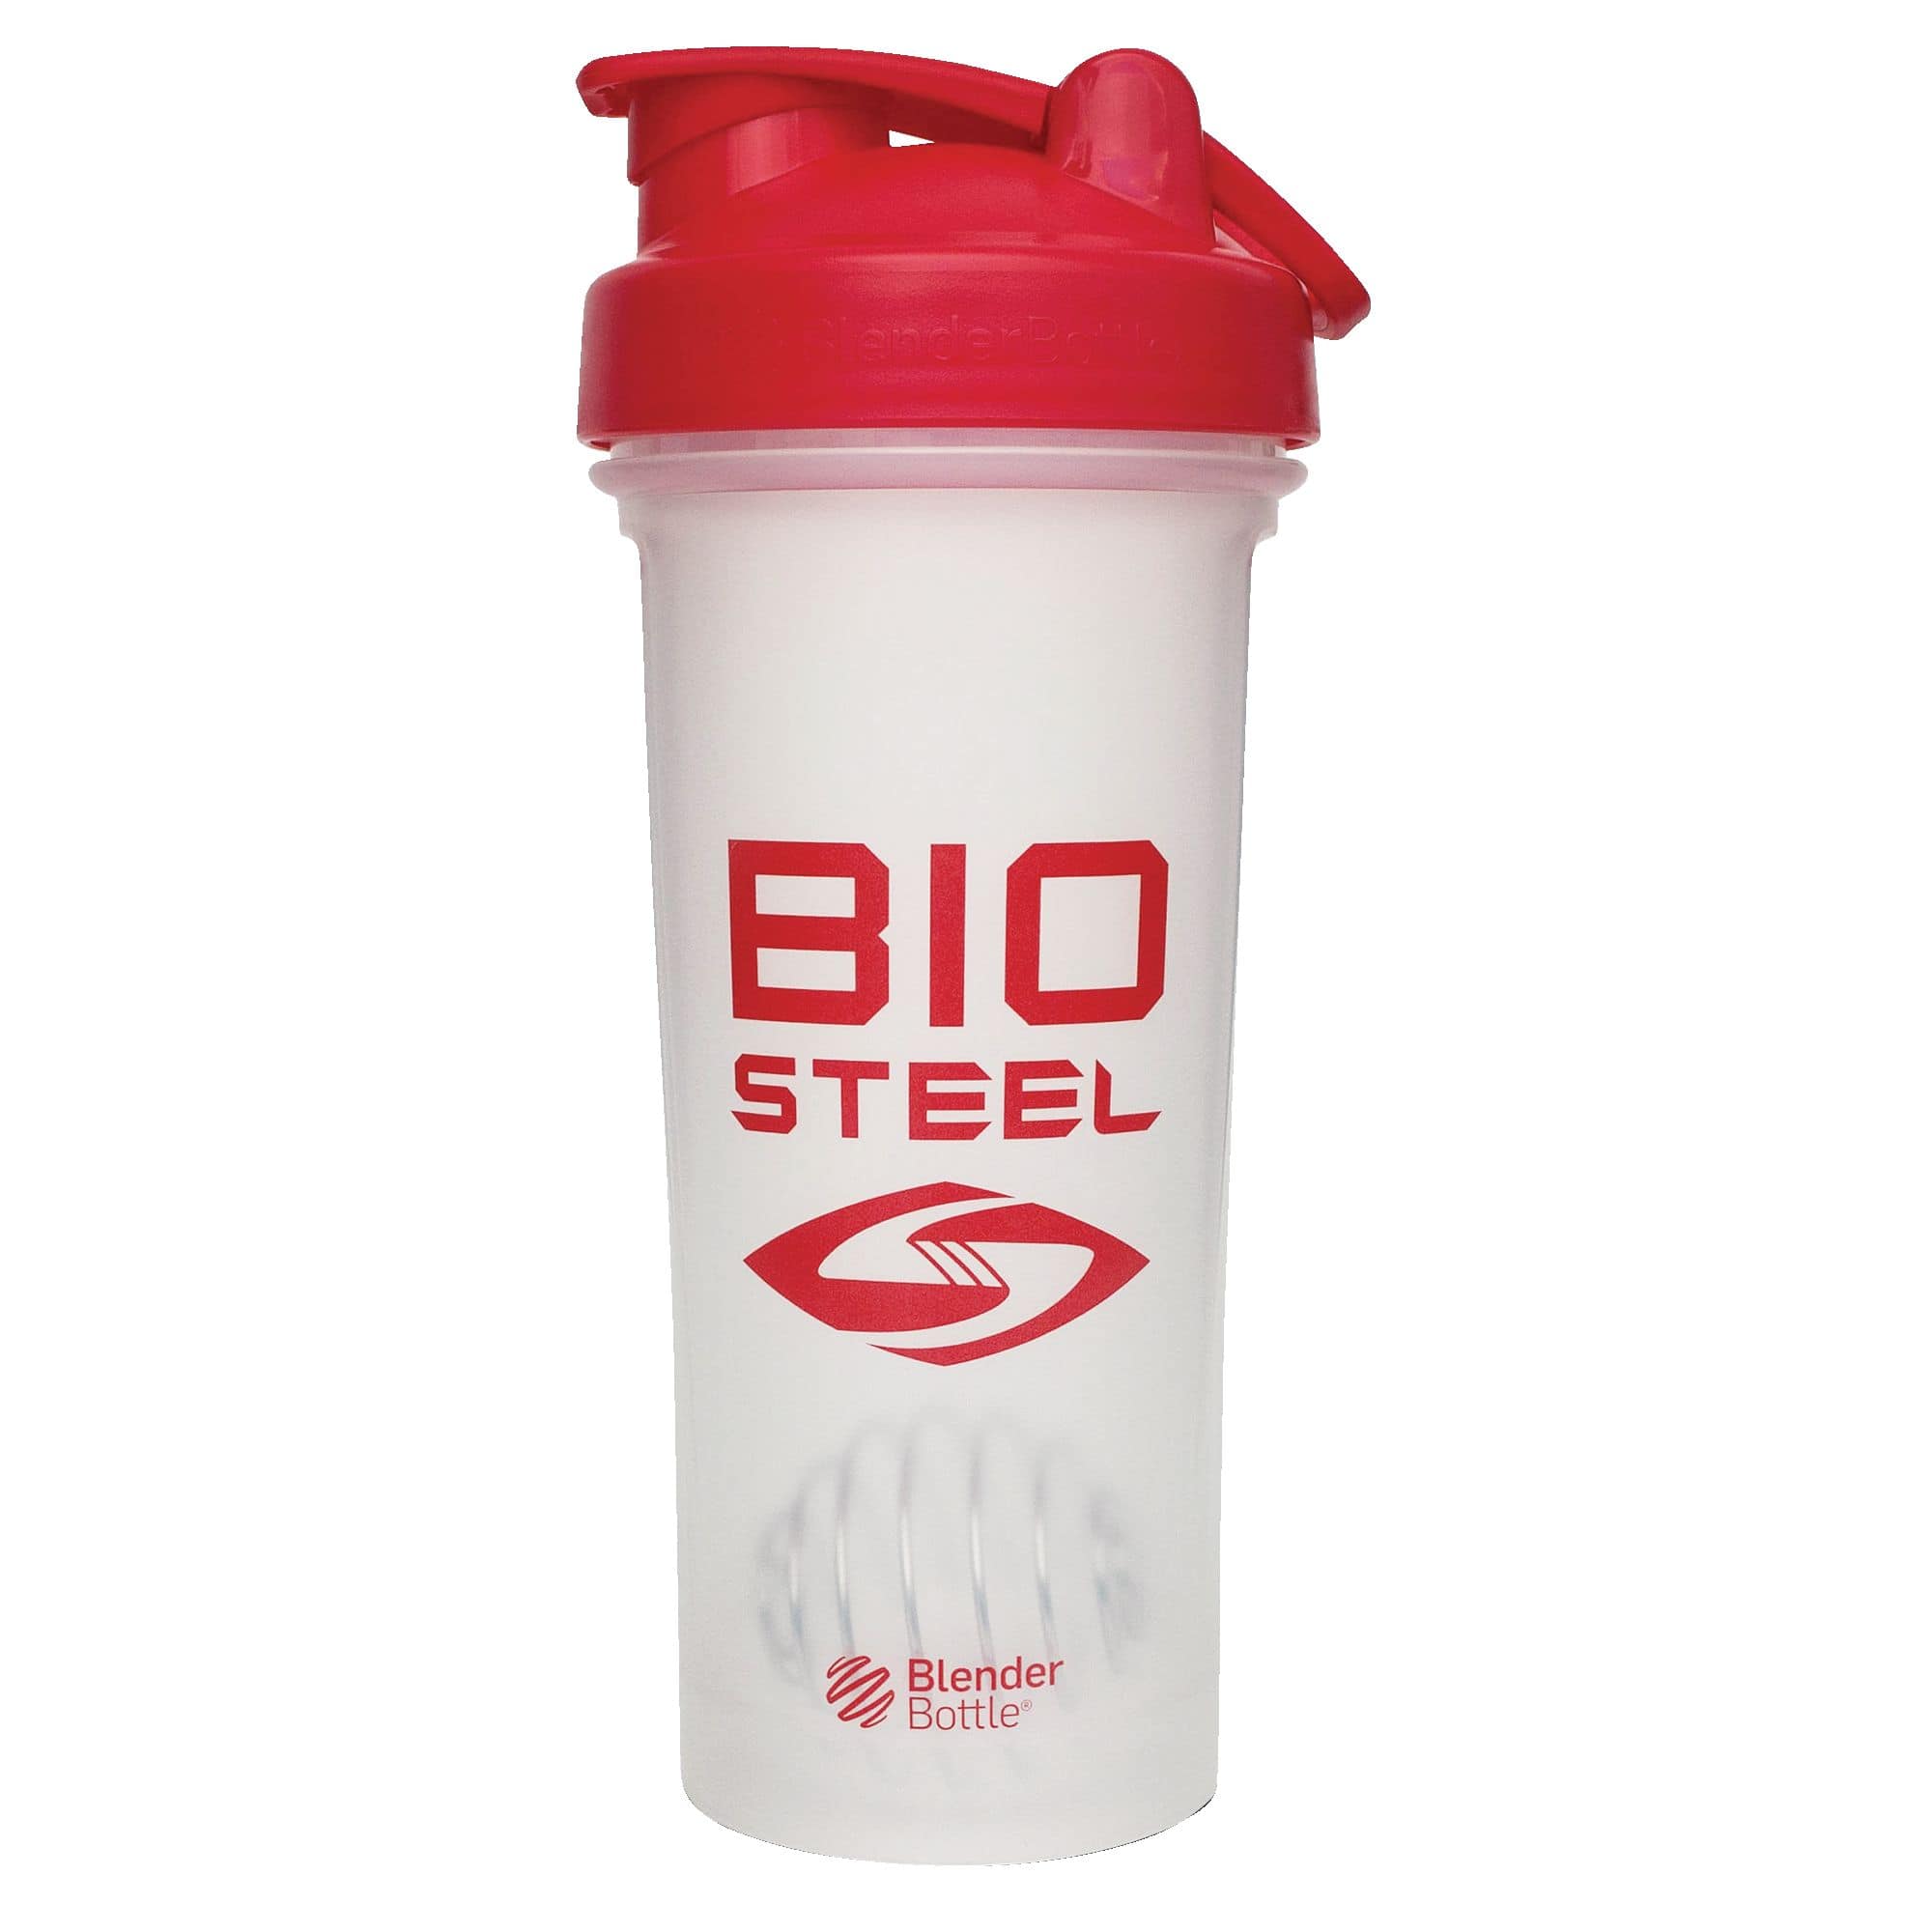 https://media-www.canadiantire.ca/product/playing/exercise/exercise-accessories/1840952/biosteel-shaker-cup-a4a406b2-aa37-4cb9-8c43-309c0d2cdc0b-jpgrendition.jpg